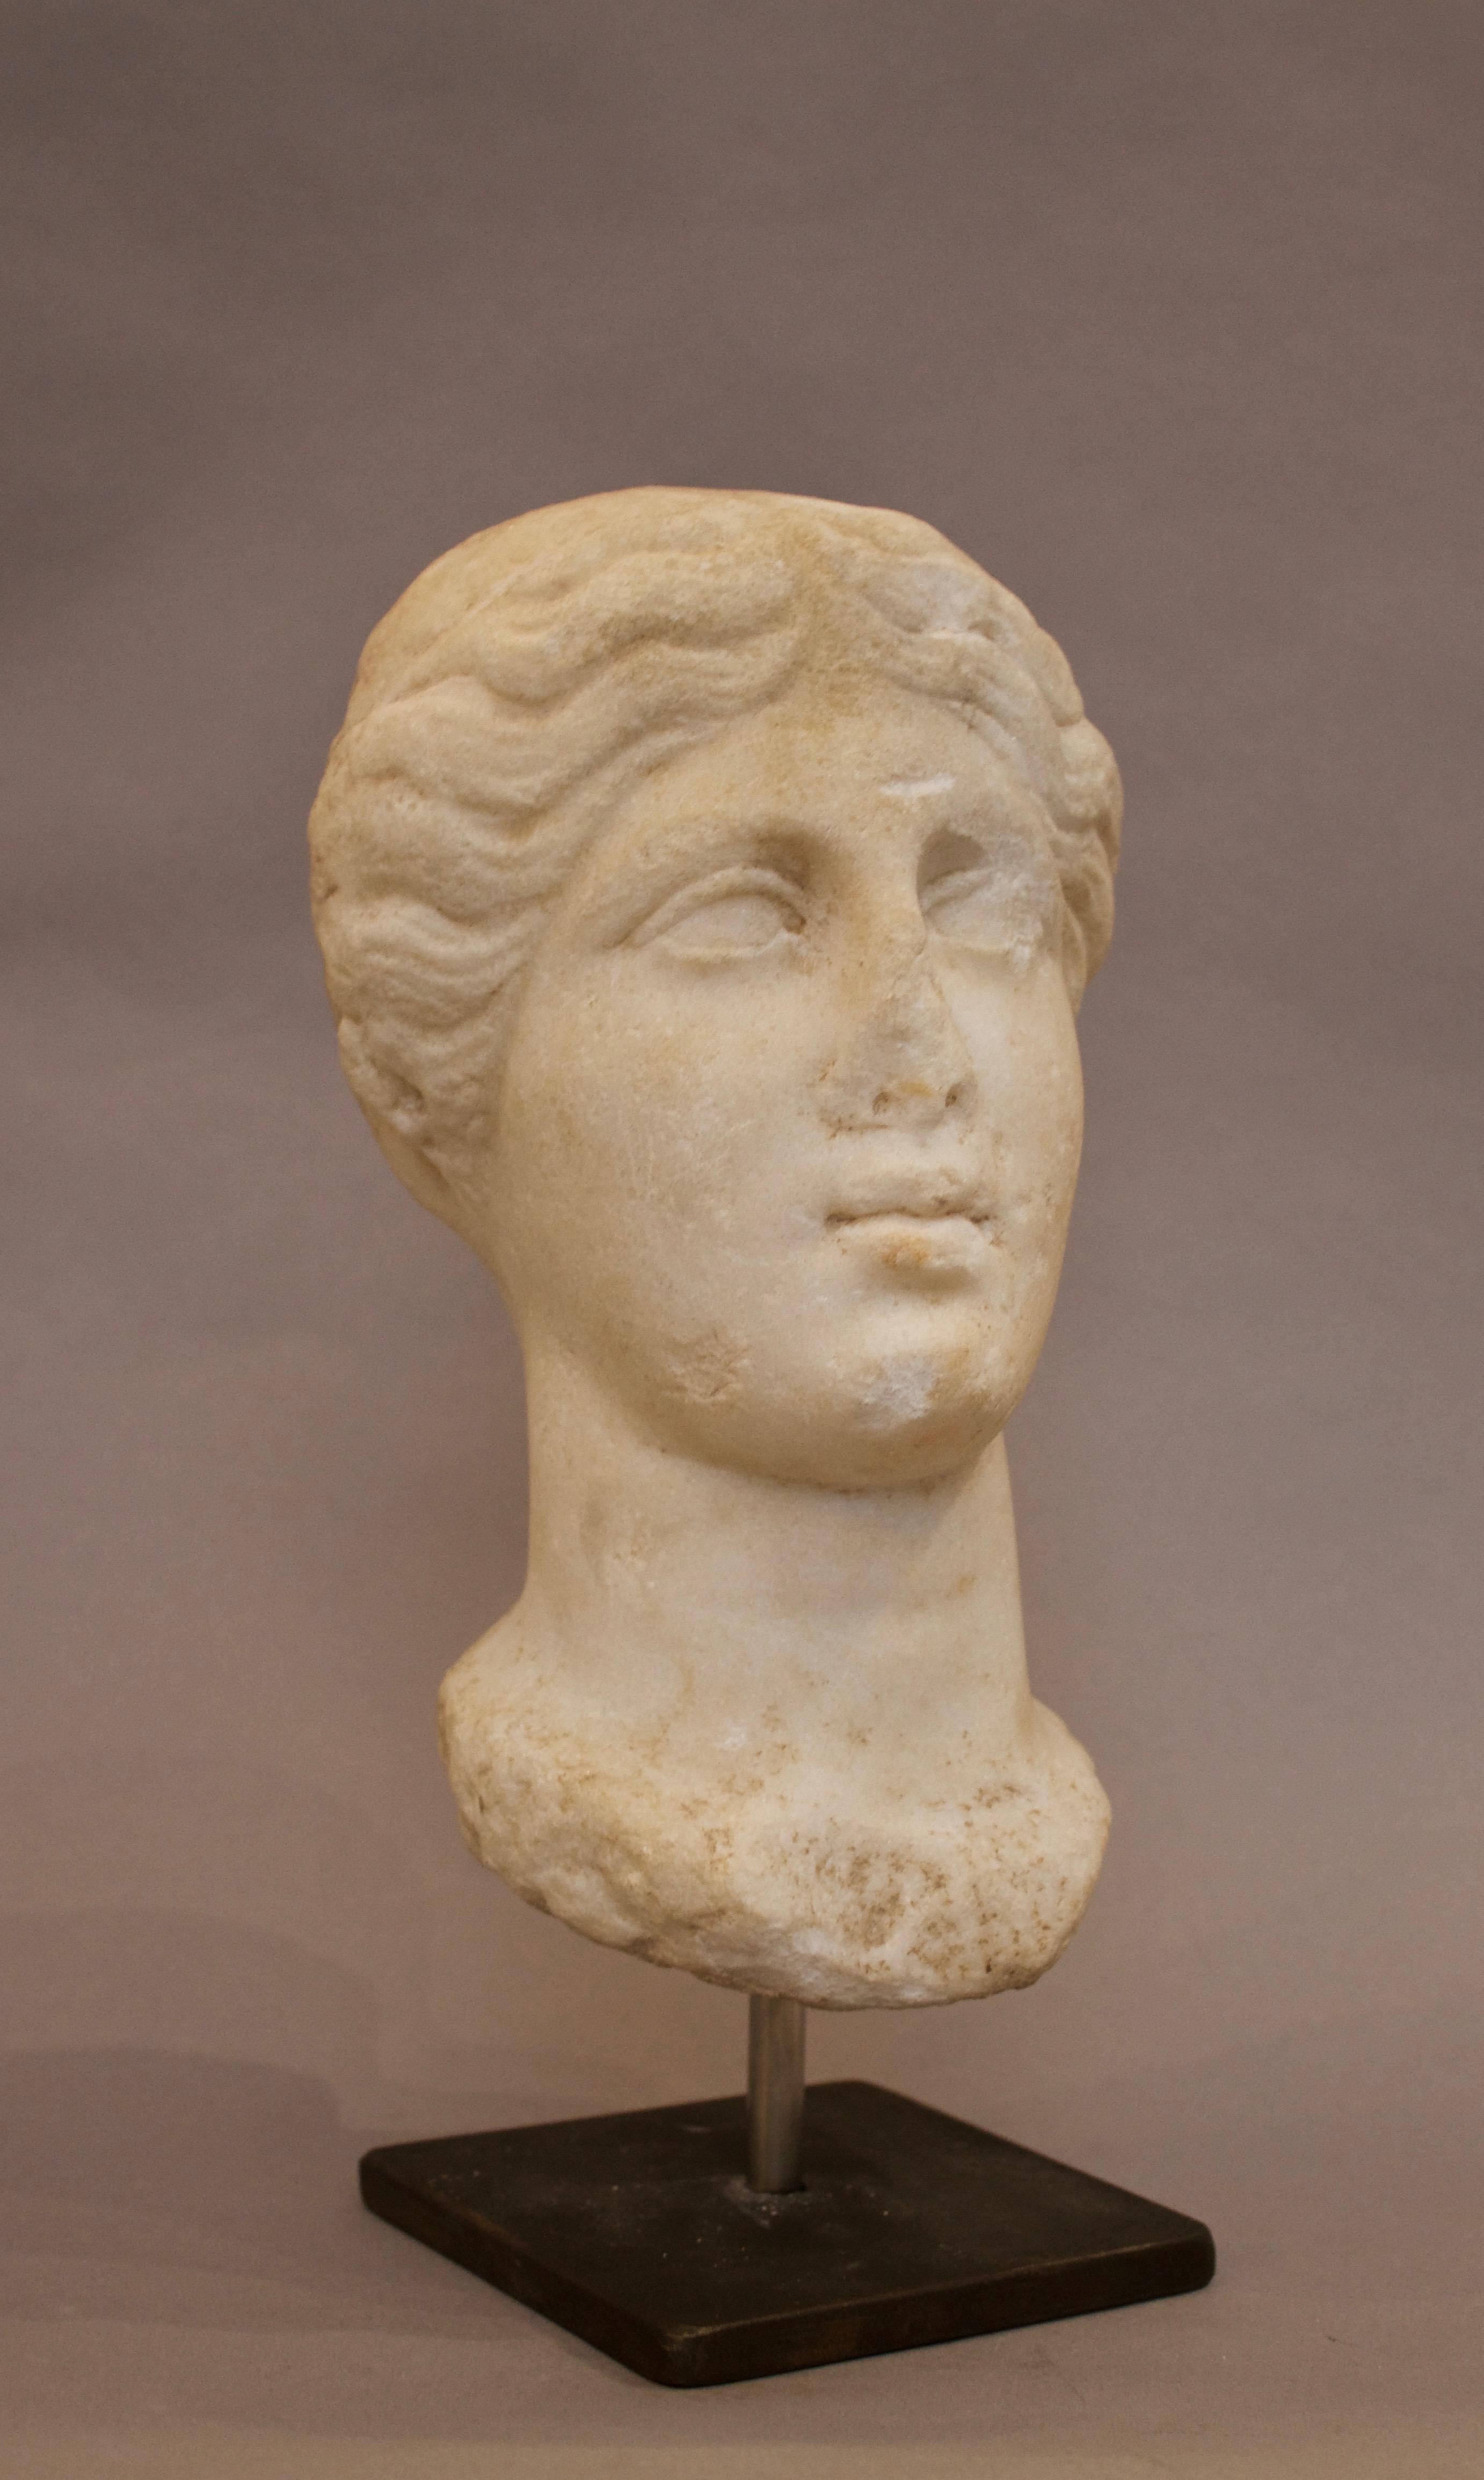 An elegant oval marble feminine head dating from the Hellenistic period, which features a neat and almost symmetrical parted hairstyle that covers the entirety of the ears. The woman seems to gaze slightly upwards and features a closed mouth. The